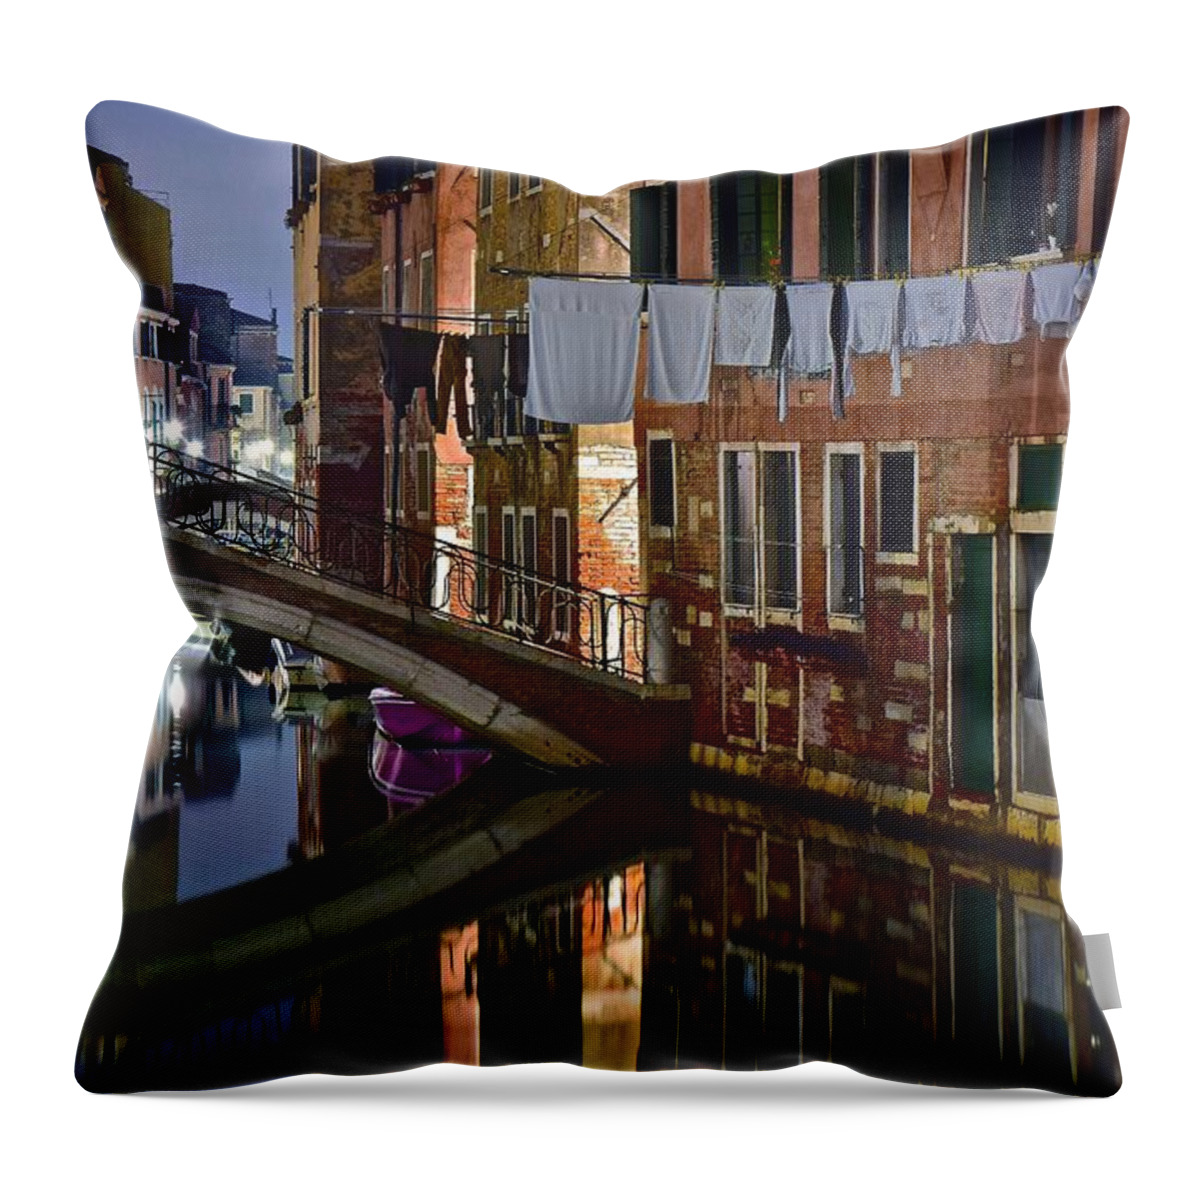 Venice Throw Pillow featuring the photograph Laundry Night by Frozen in Time Fine Art Photography